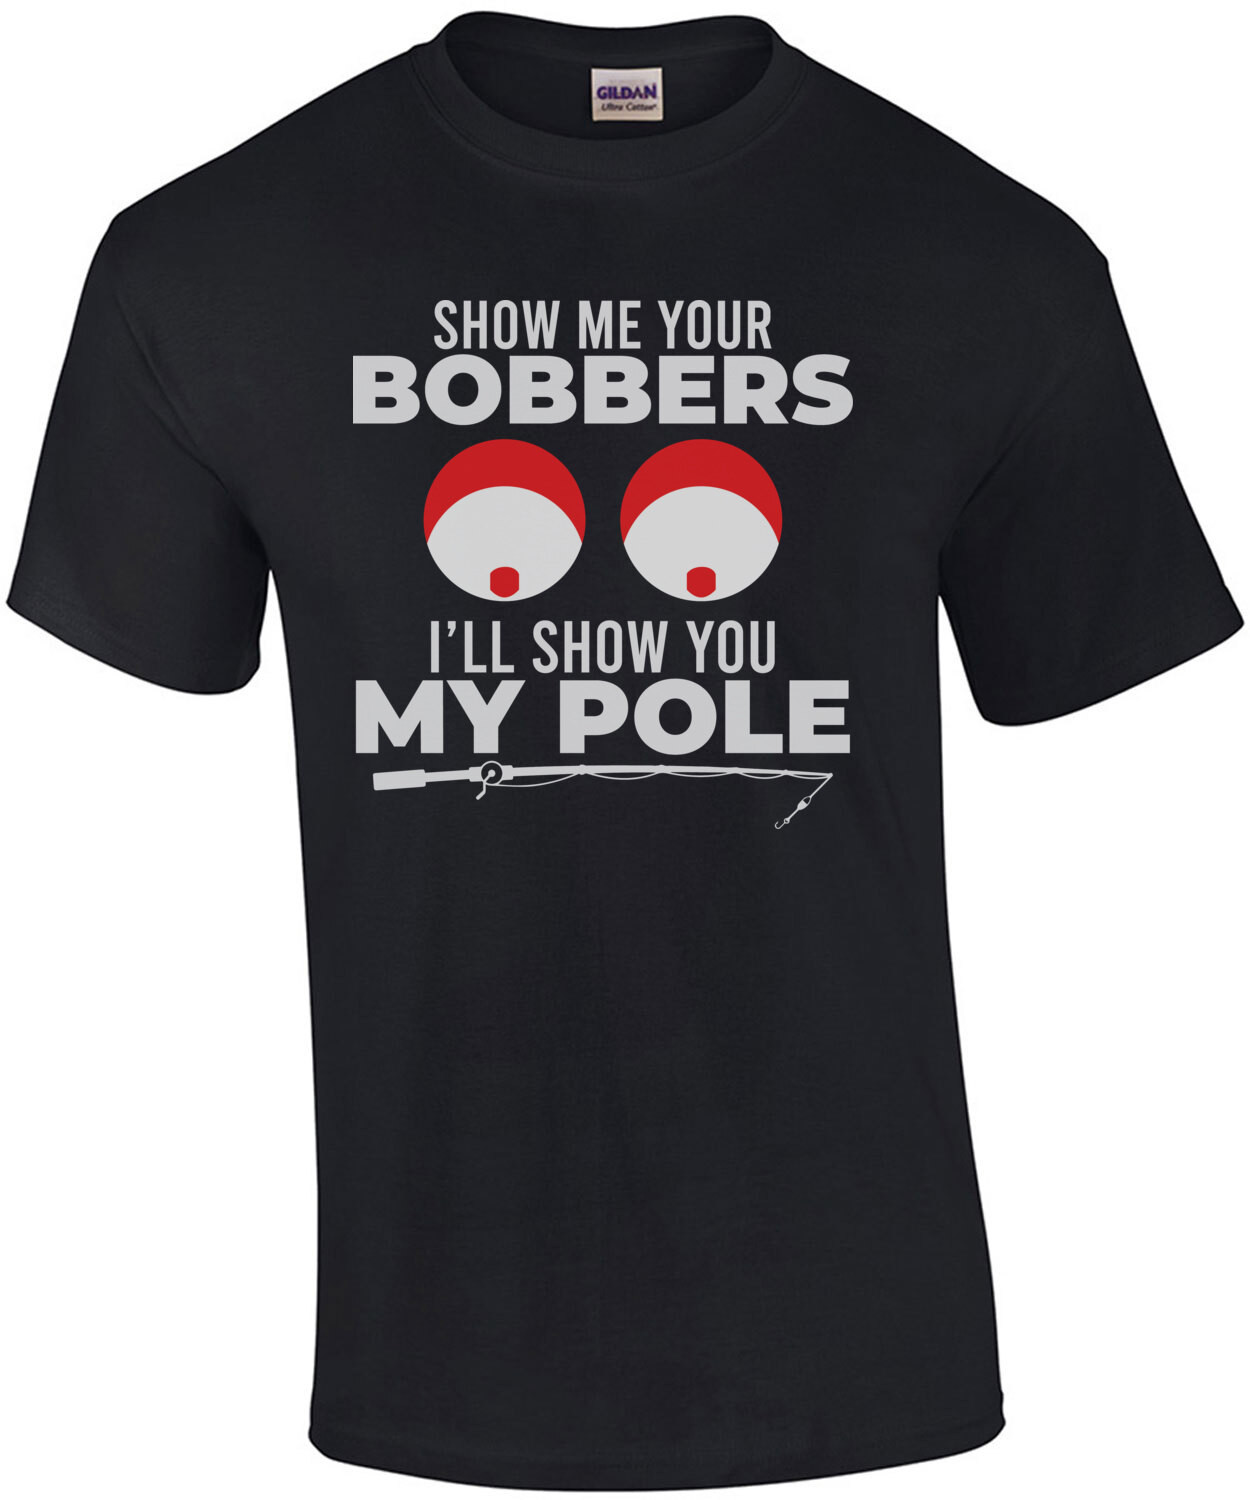 Show me your bobbers - I'll show you my pole - sexual offensive fishing t-shirt